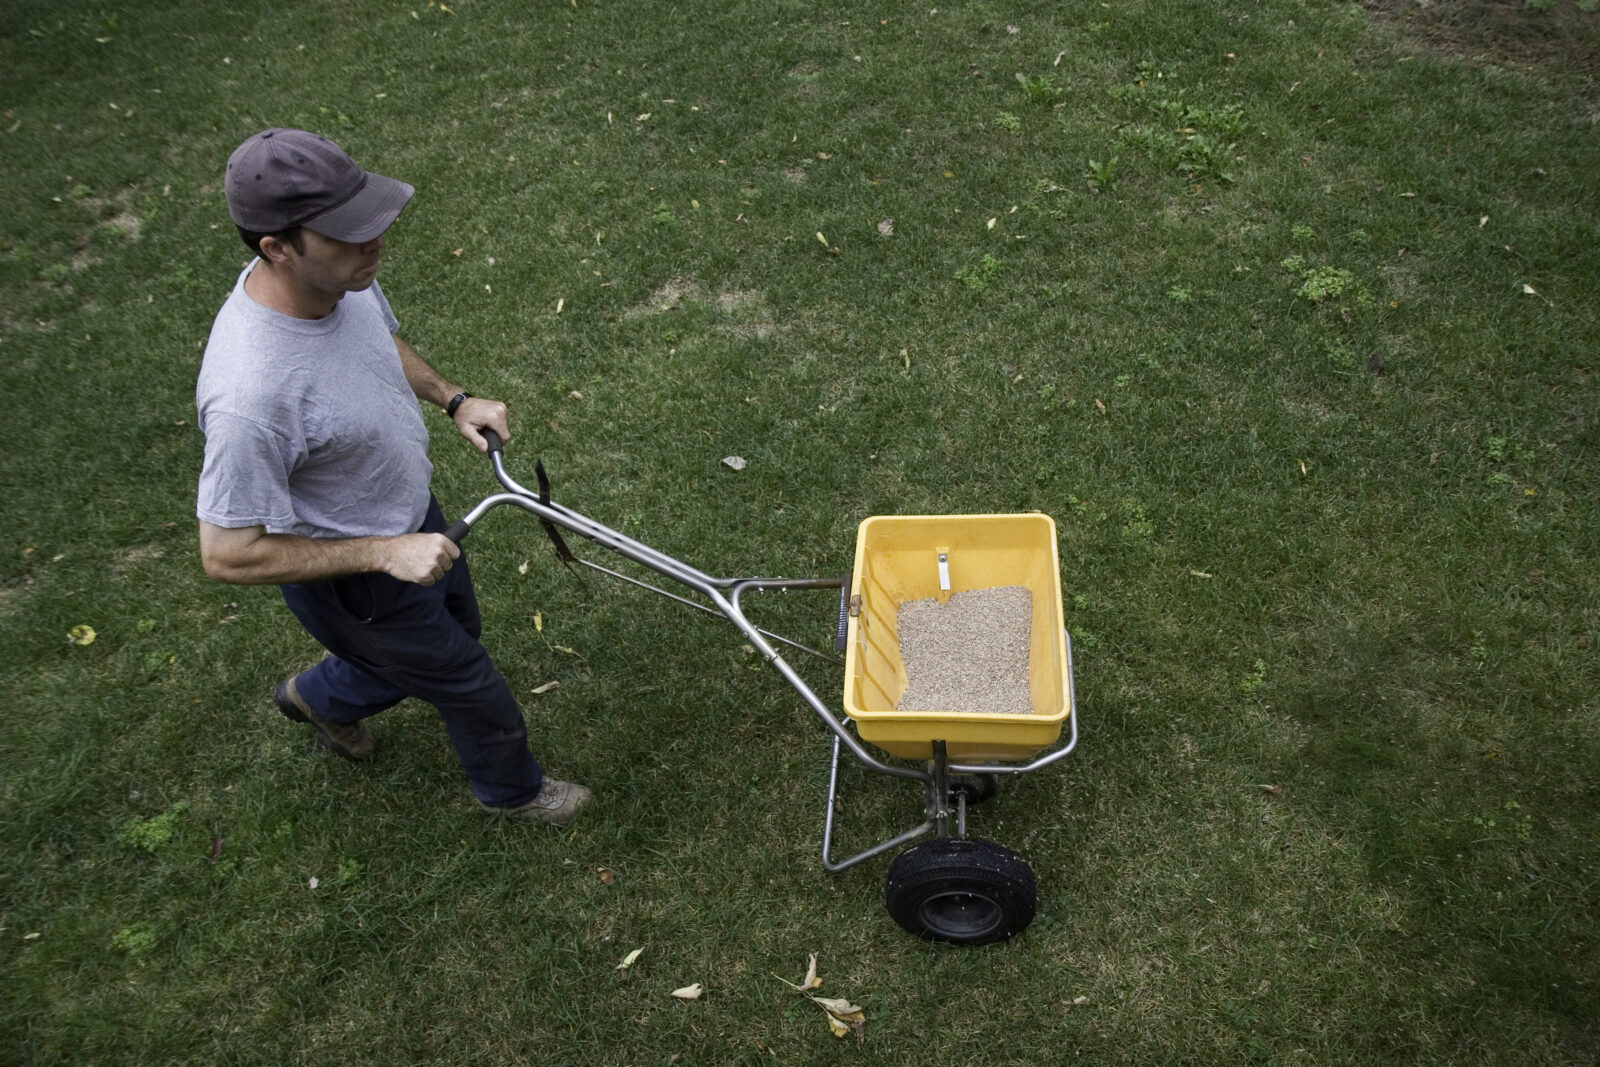 A man spreads fertilizer on a lawn, for an LCA post about proper lawn fertilization to avoid nutrient runoff.